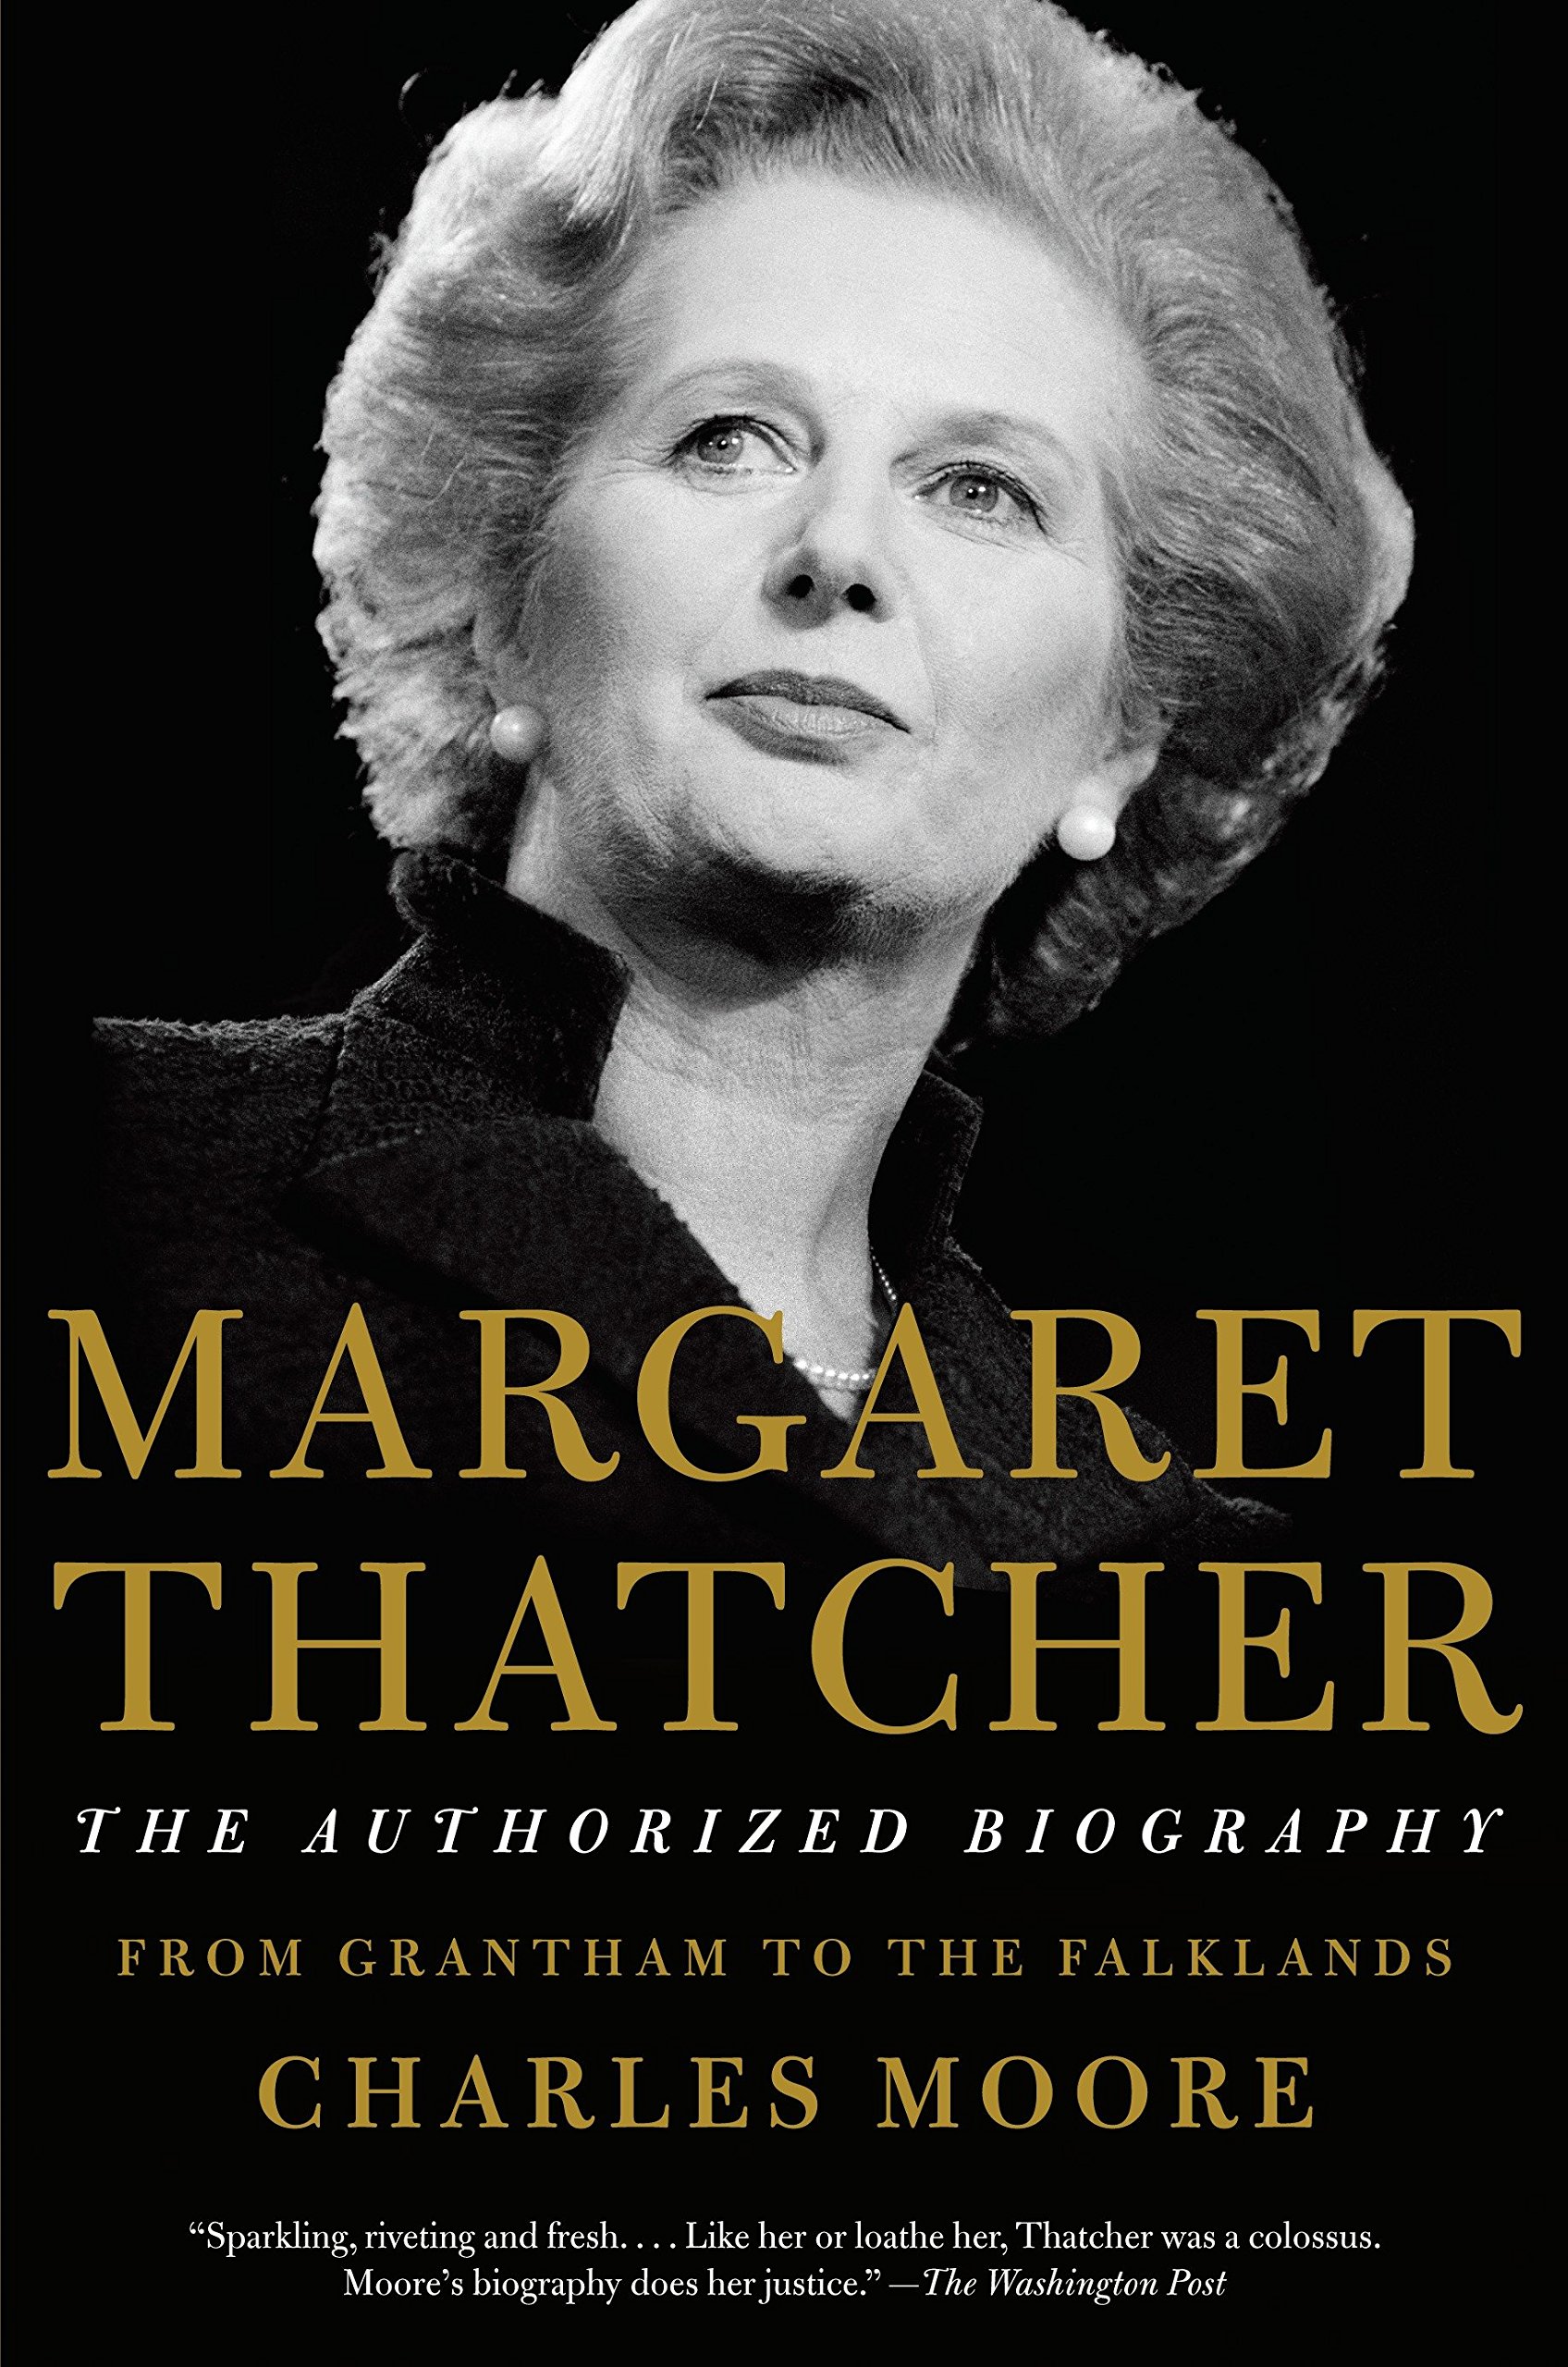 Margaret Thatcher: The Authorized Biography, Volume 1: From Grantham to the Falklands